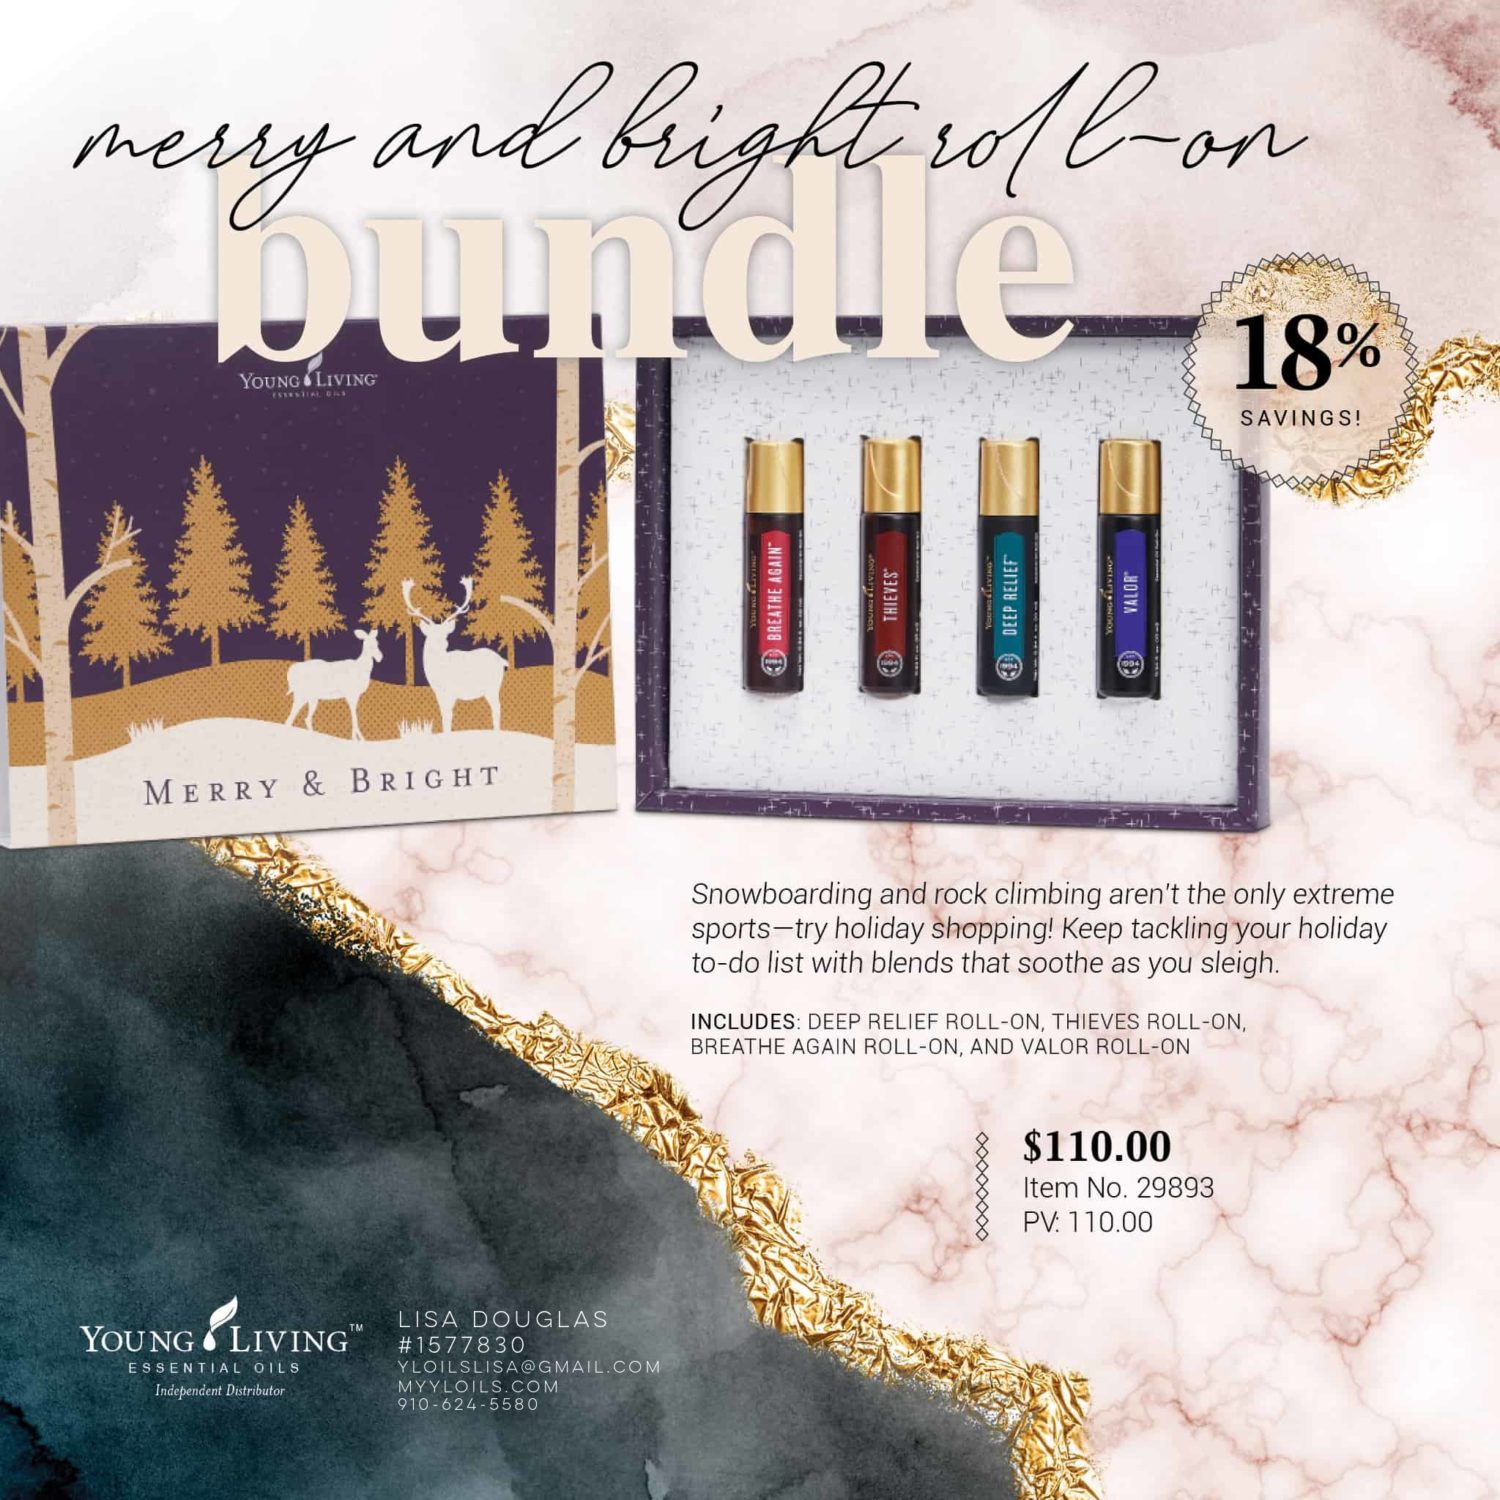 Young Living Merry and Bright Roll-On Bundle Black Friday 2019